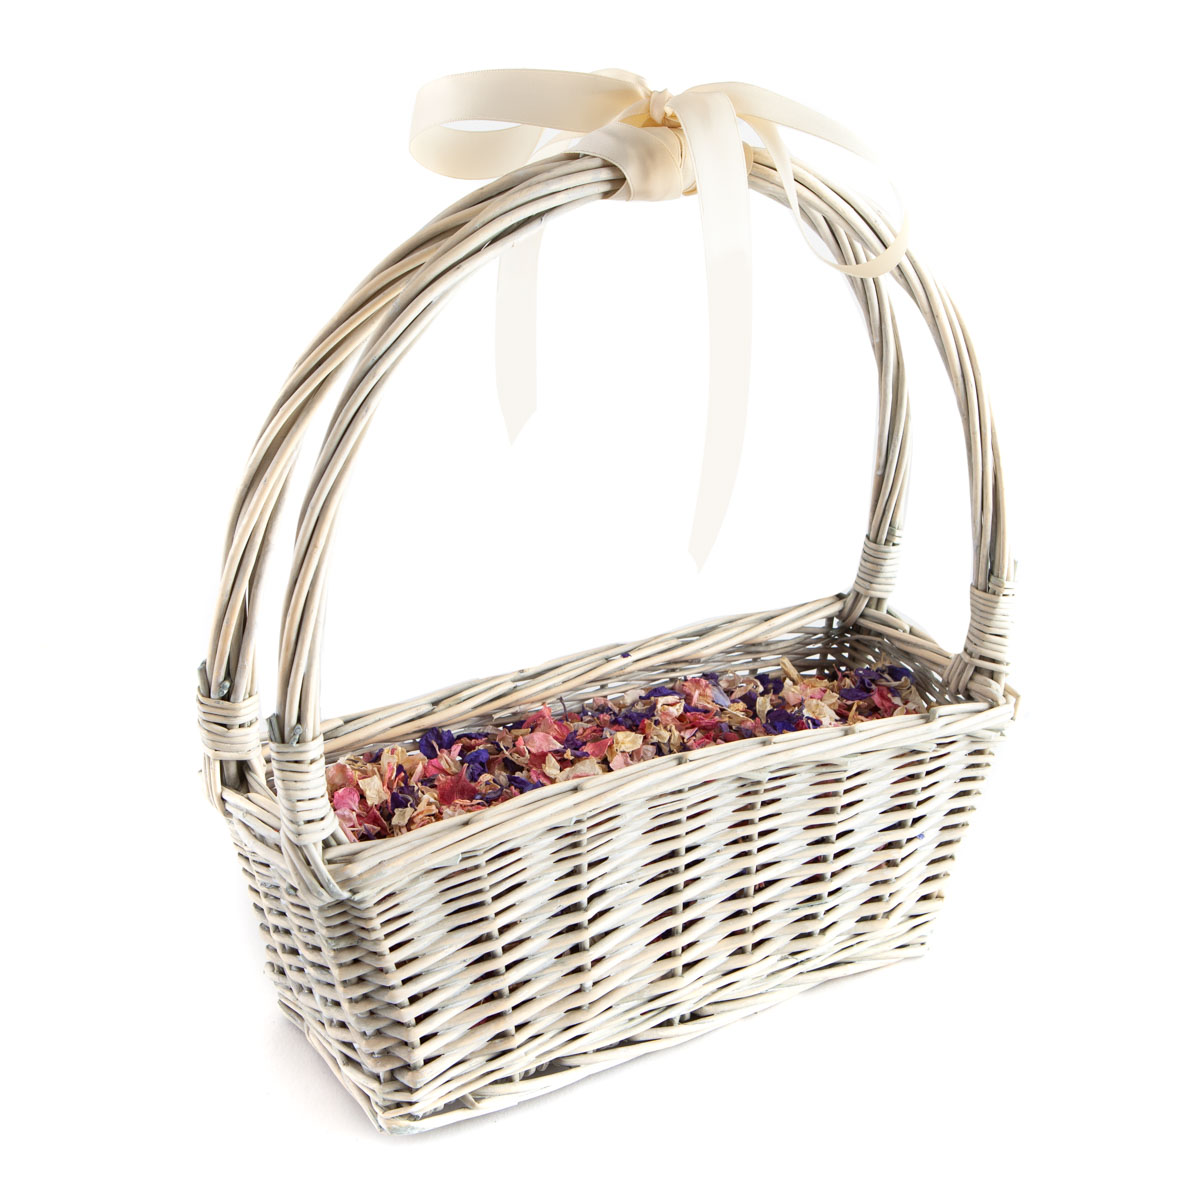 A Small White Confetti Basket filled with real flower petal confetti